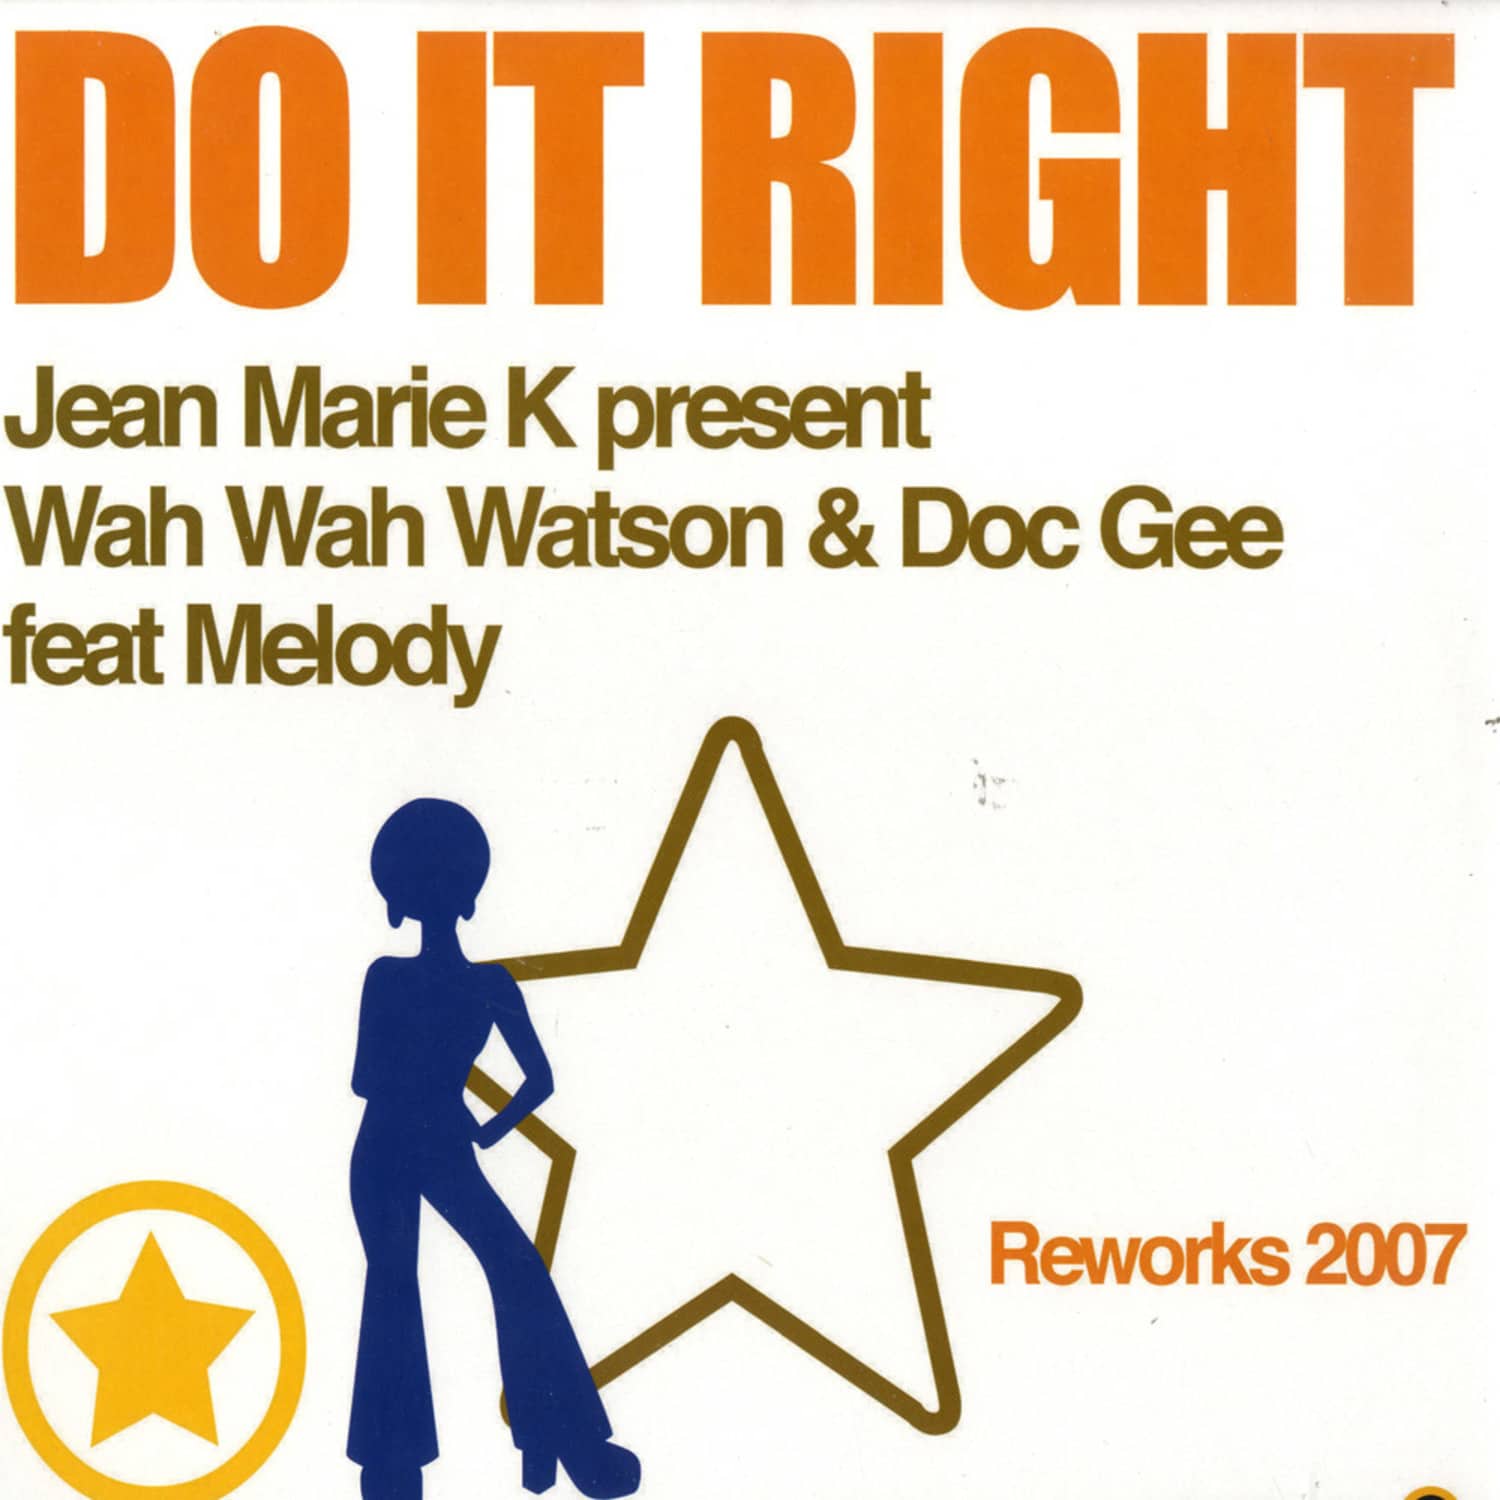 Jean Marie K present Wah Wah Watson & Doc Gee feat Melody - DO IT RIGHT - REWORKS 2007